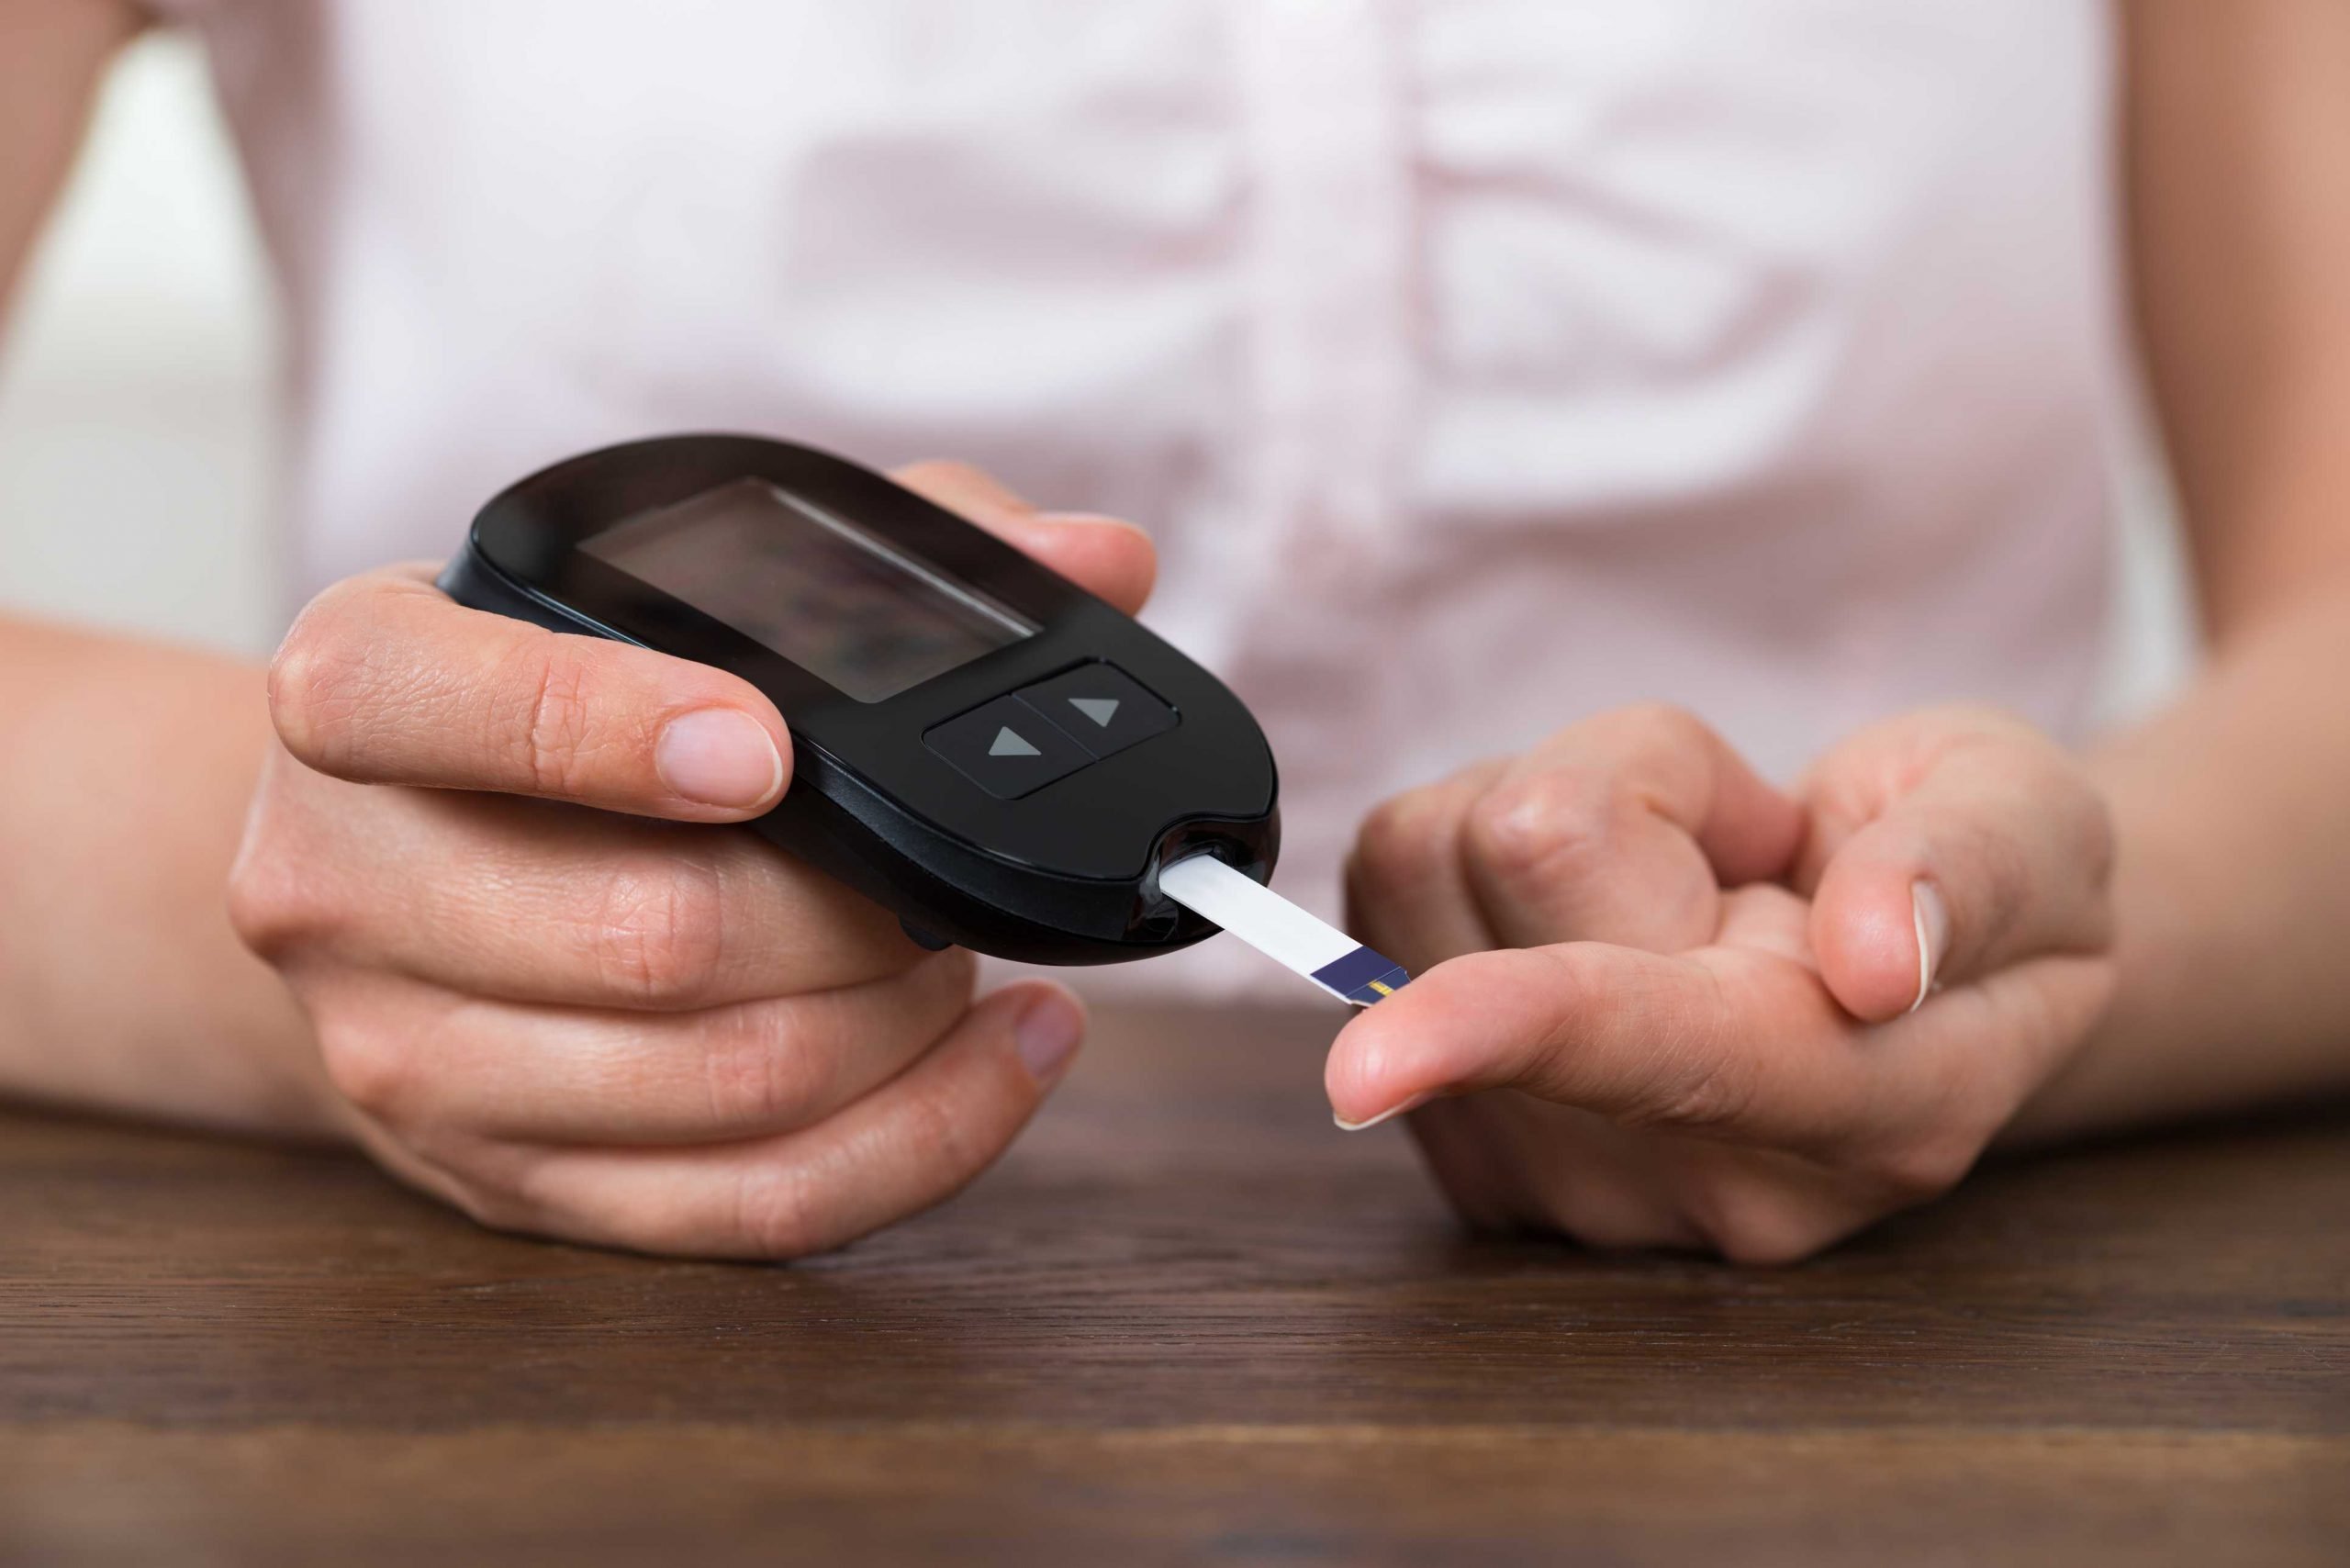 How To Test Your Blood Glucose - Video Guide